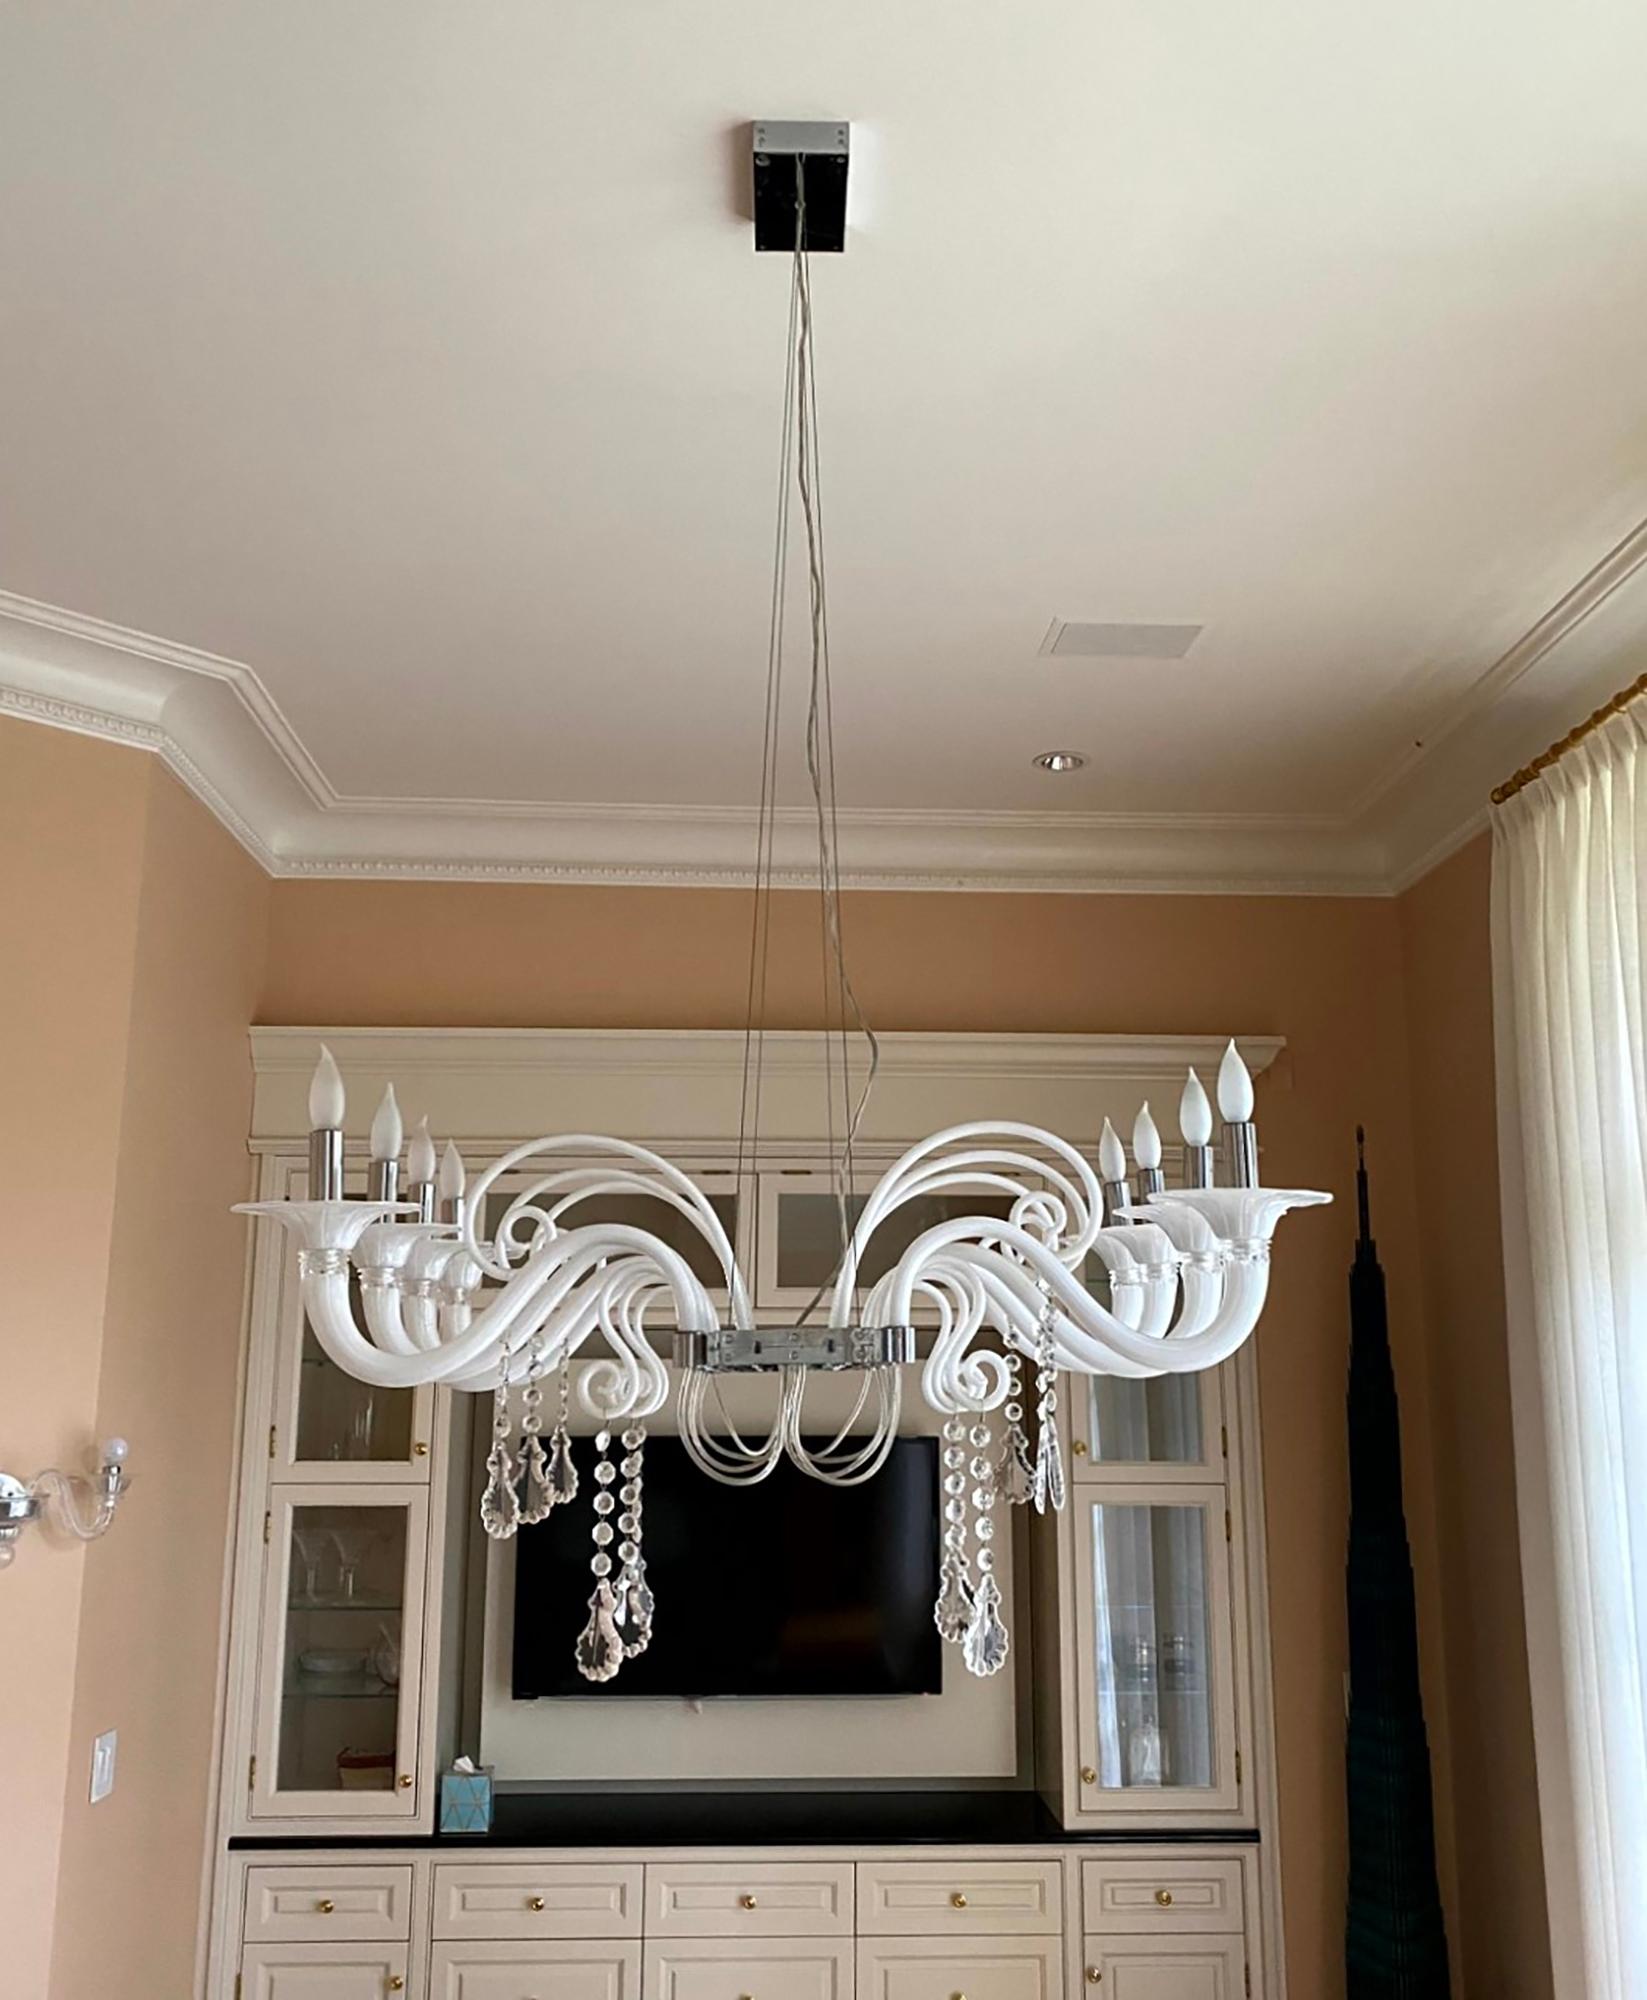 This unusual Contemporary chandelier, designed by Franco Raggi for Barovier & Toso, has eight white glass arms and stainless steel hardware. It is draped with clear crystals on the bottom. This was retrieved from an estate located in Greenwich,